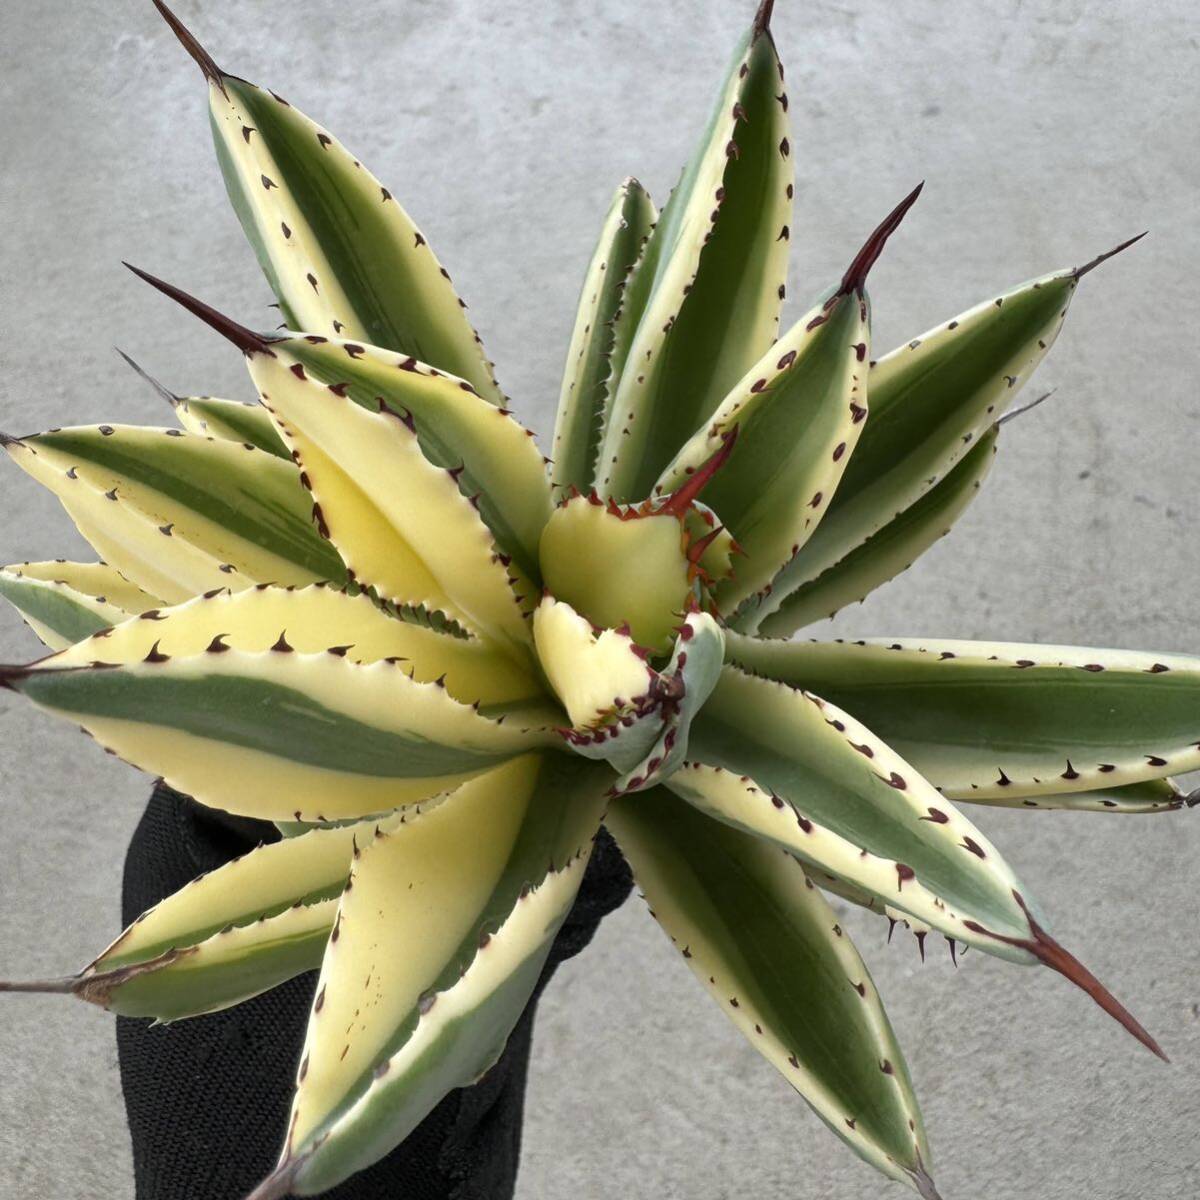 Uncle Sam - アガベ 'キュービック' ワイド マルギナータ / Agave 'Cubic' wide marginata special variegationの画像2